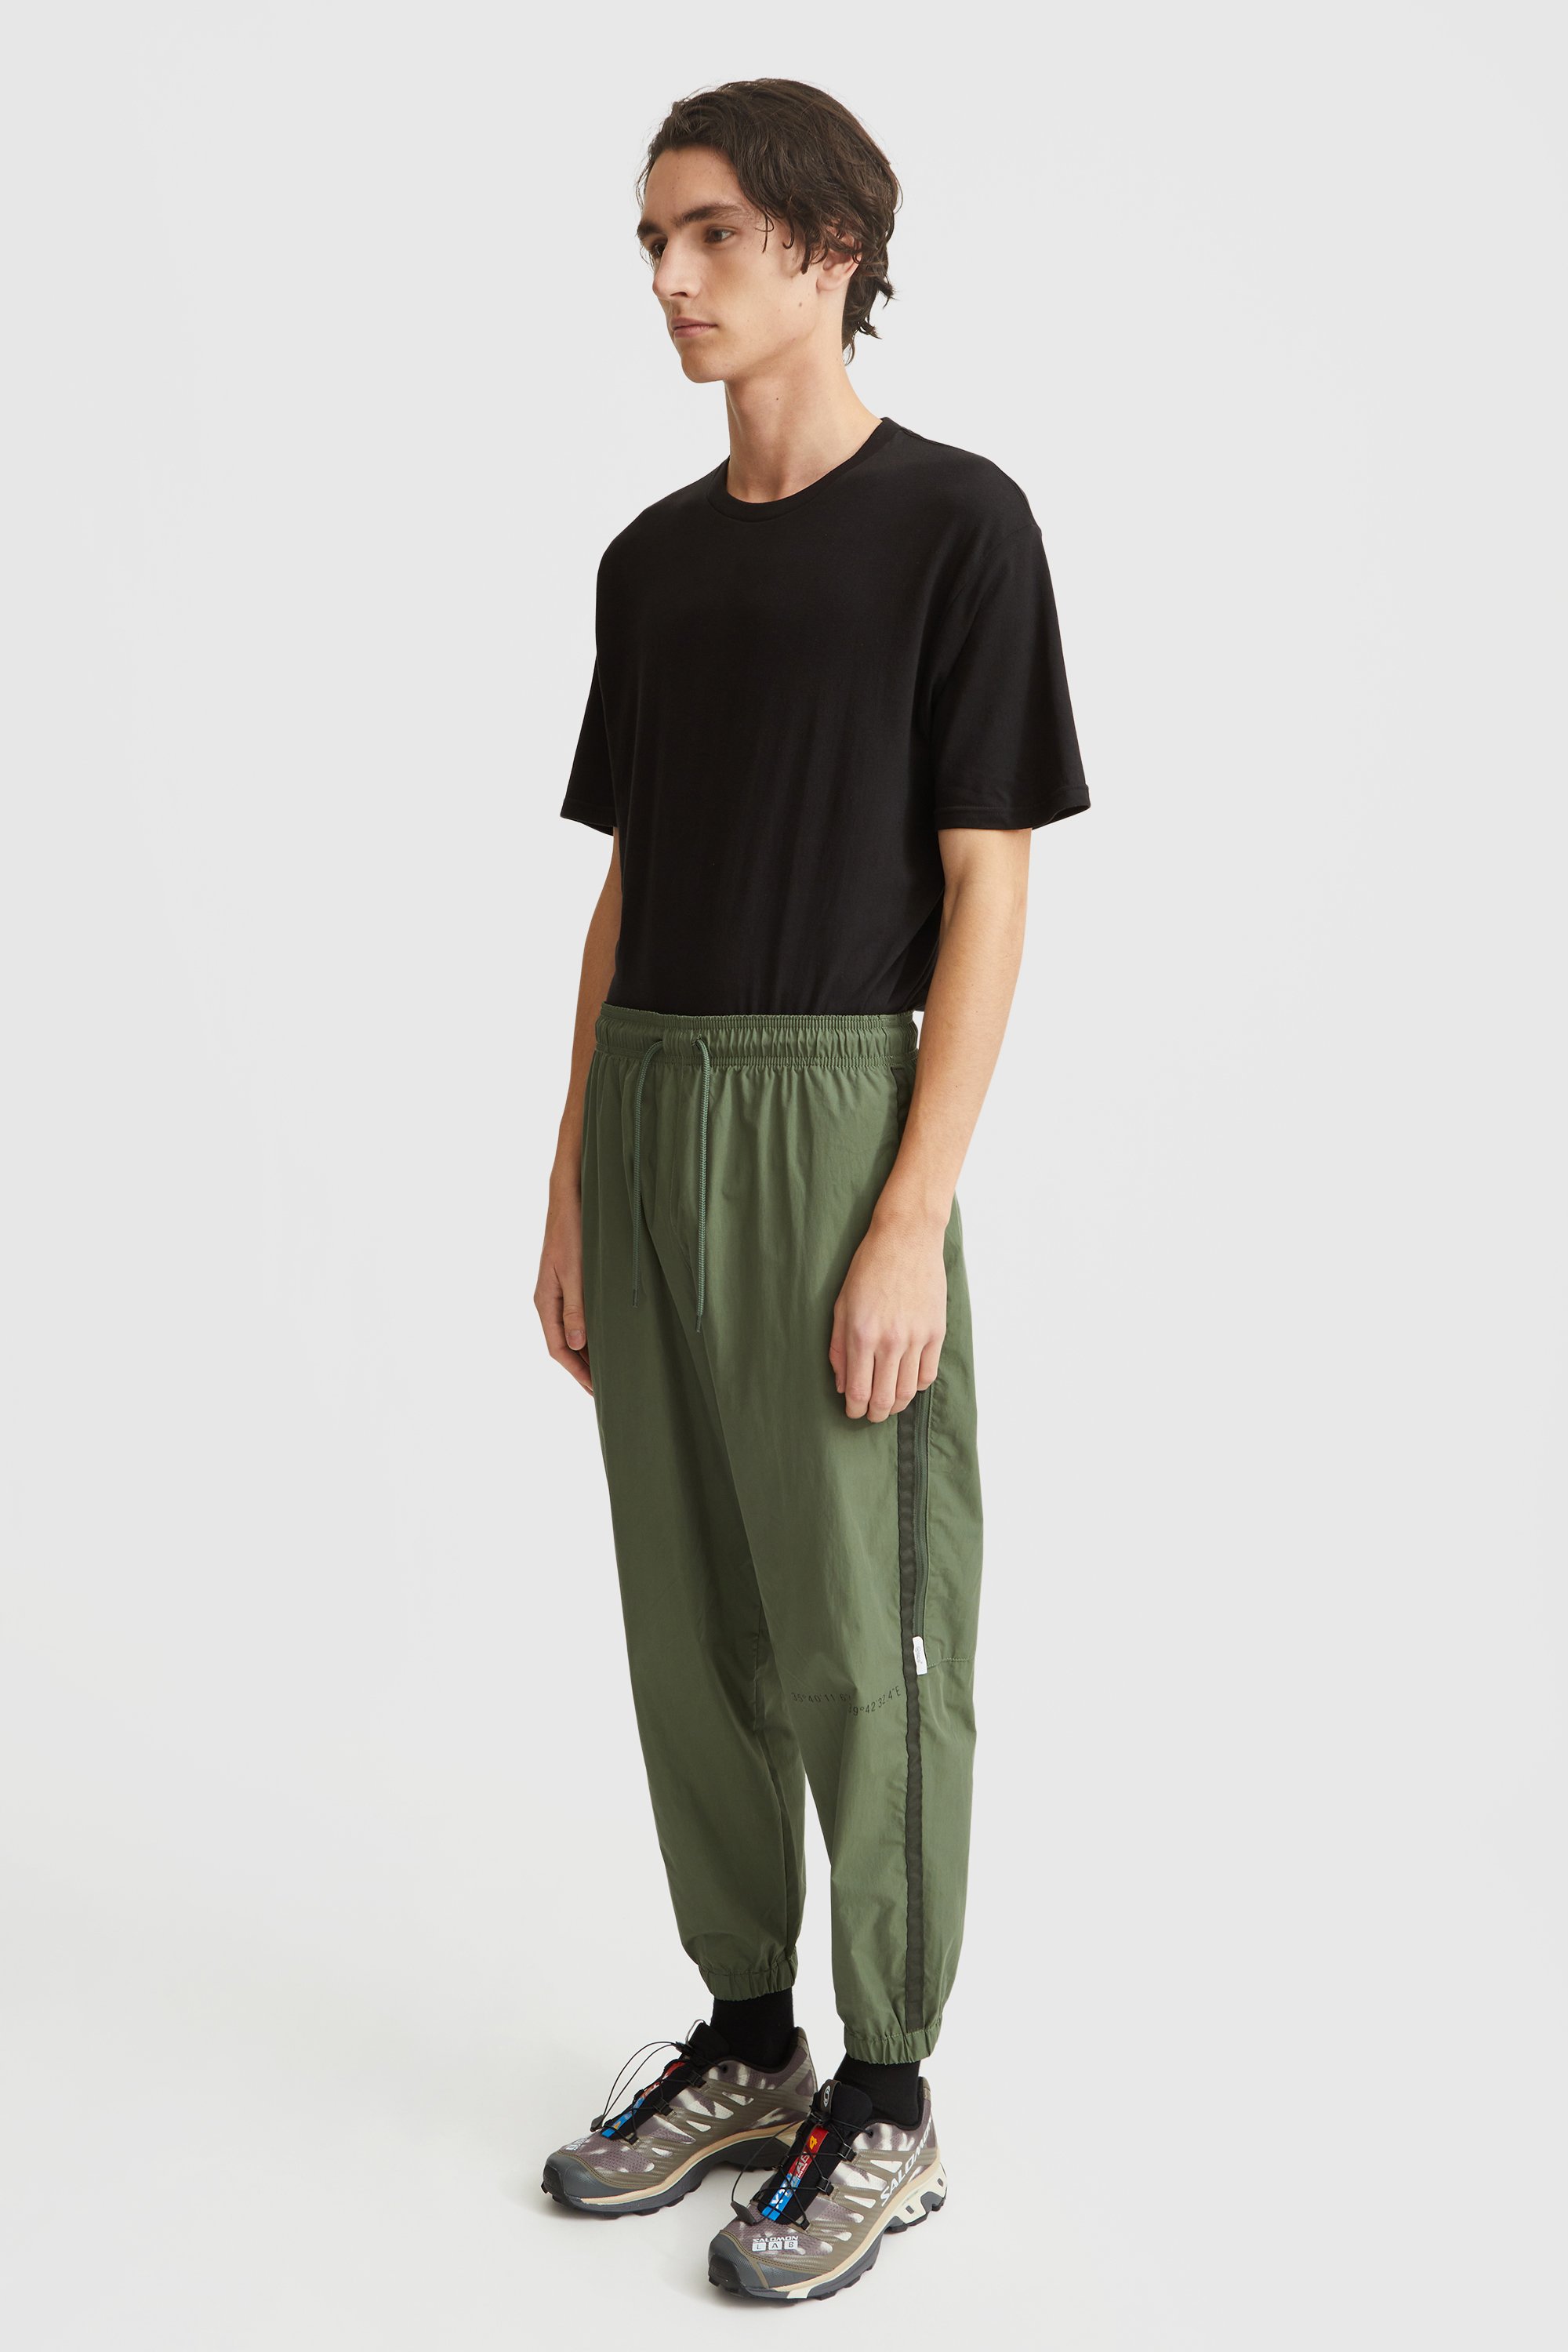 Wtaps 21AW INCOM TROUSERS NYCO. WEATHER